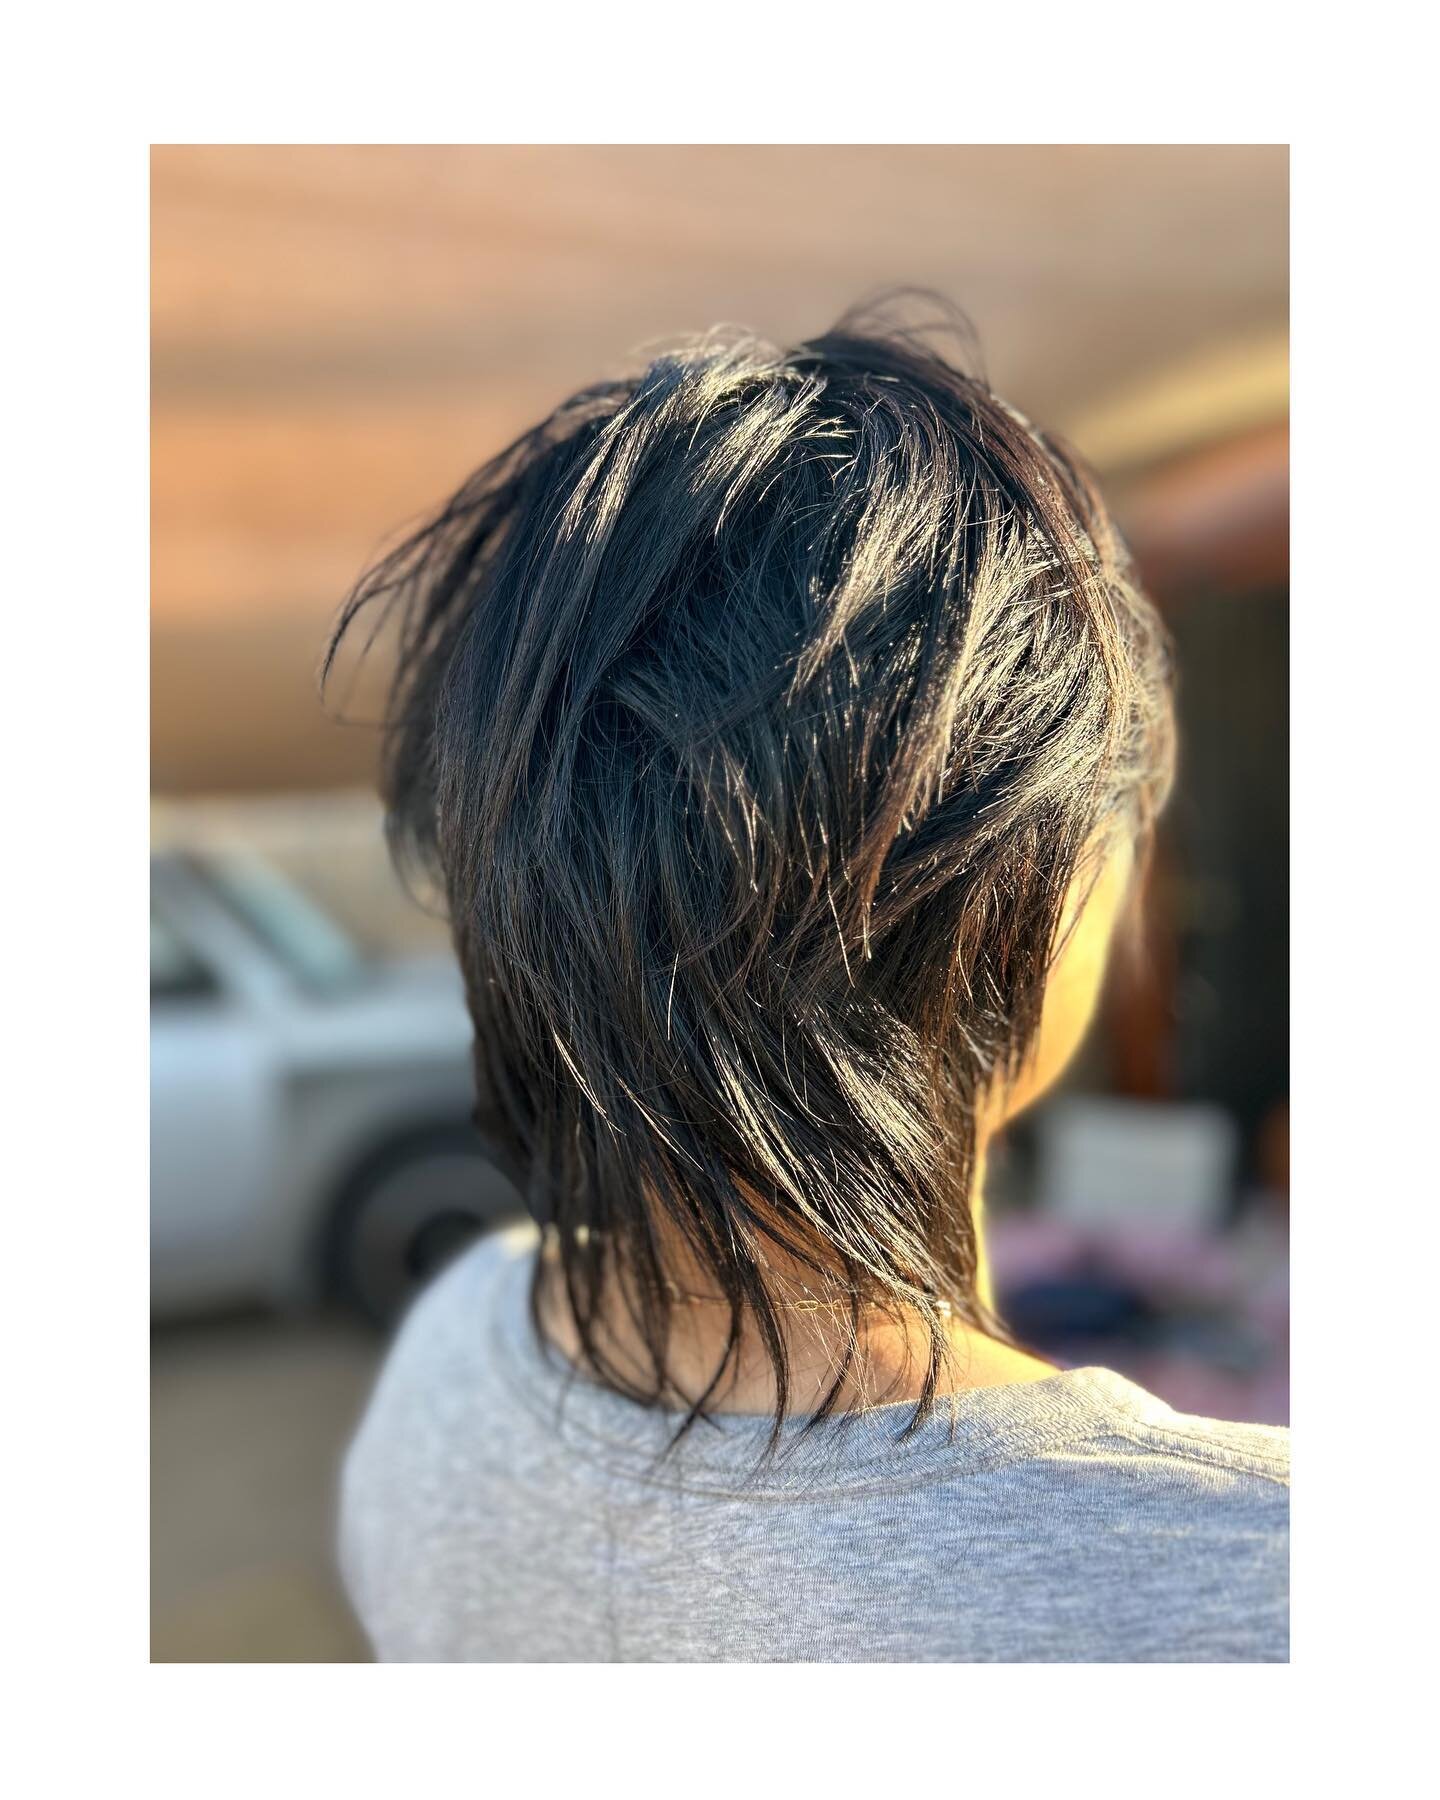 This ruled. Thank you for letting me be your hairdresser. #jones29palms #razorcuts #badass #summer